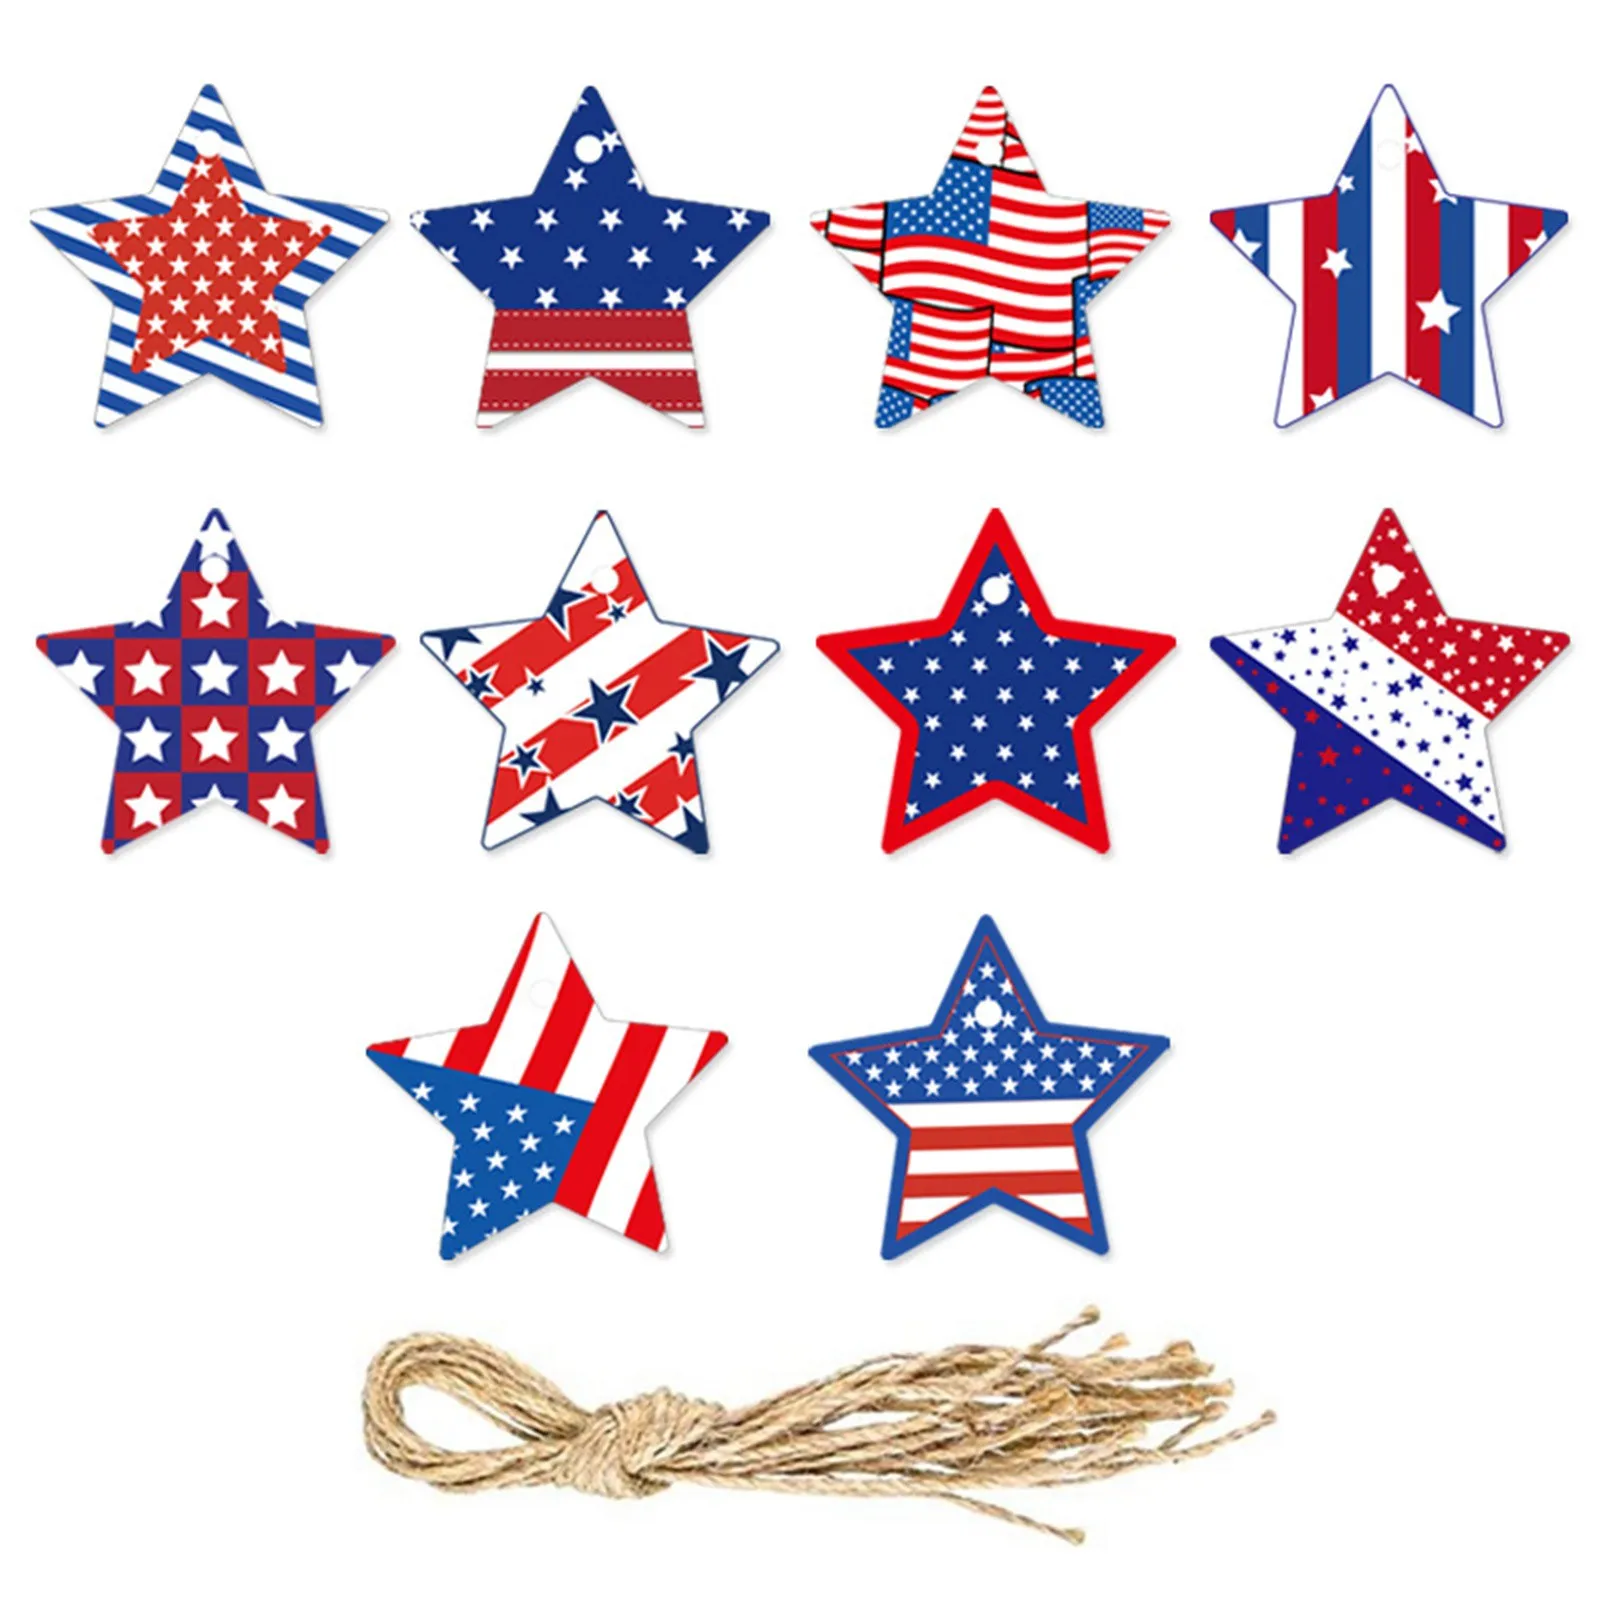 10pcs American Independence Day Decorative Hanging Party Gift Decoration Fireplace Decorations for Mantle Fir Garland Crafts images - 6